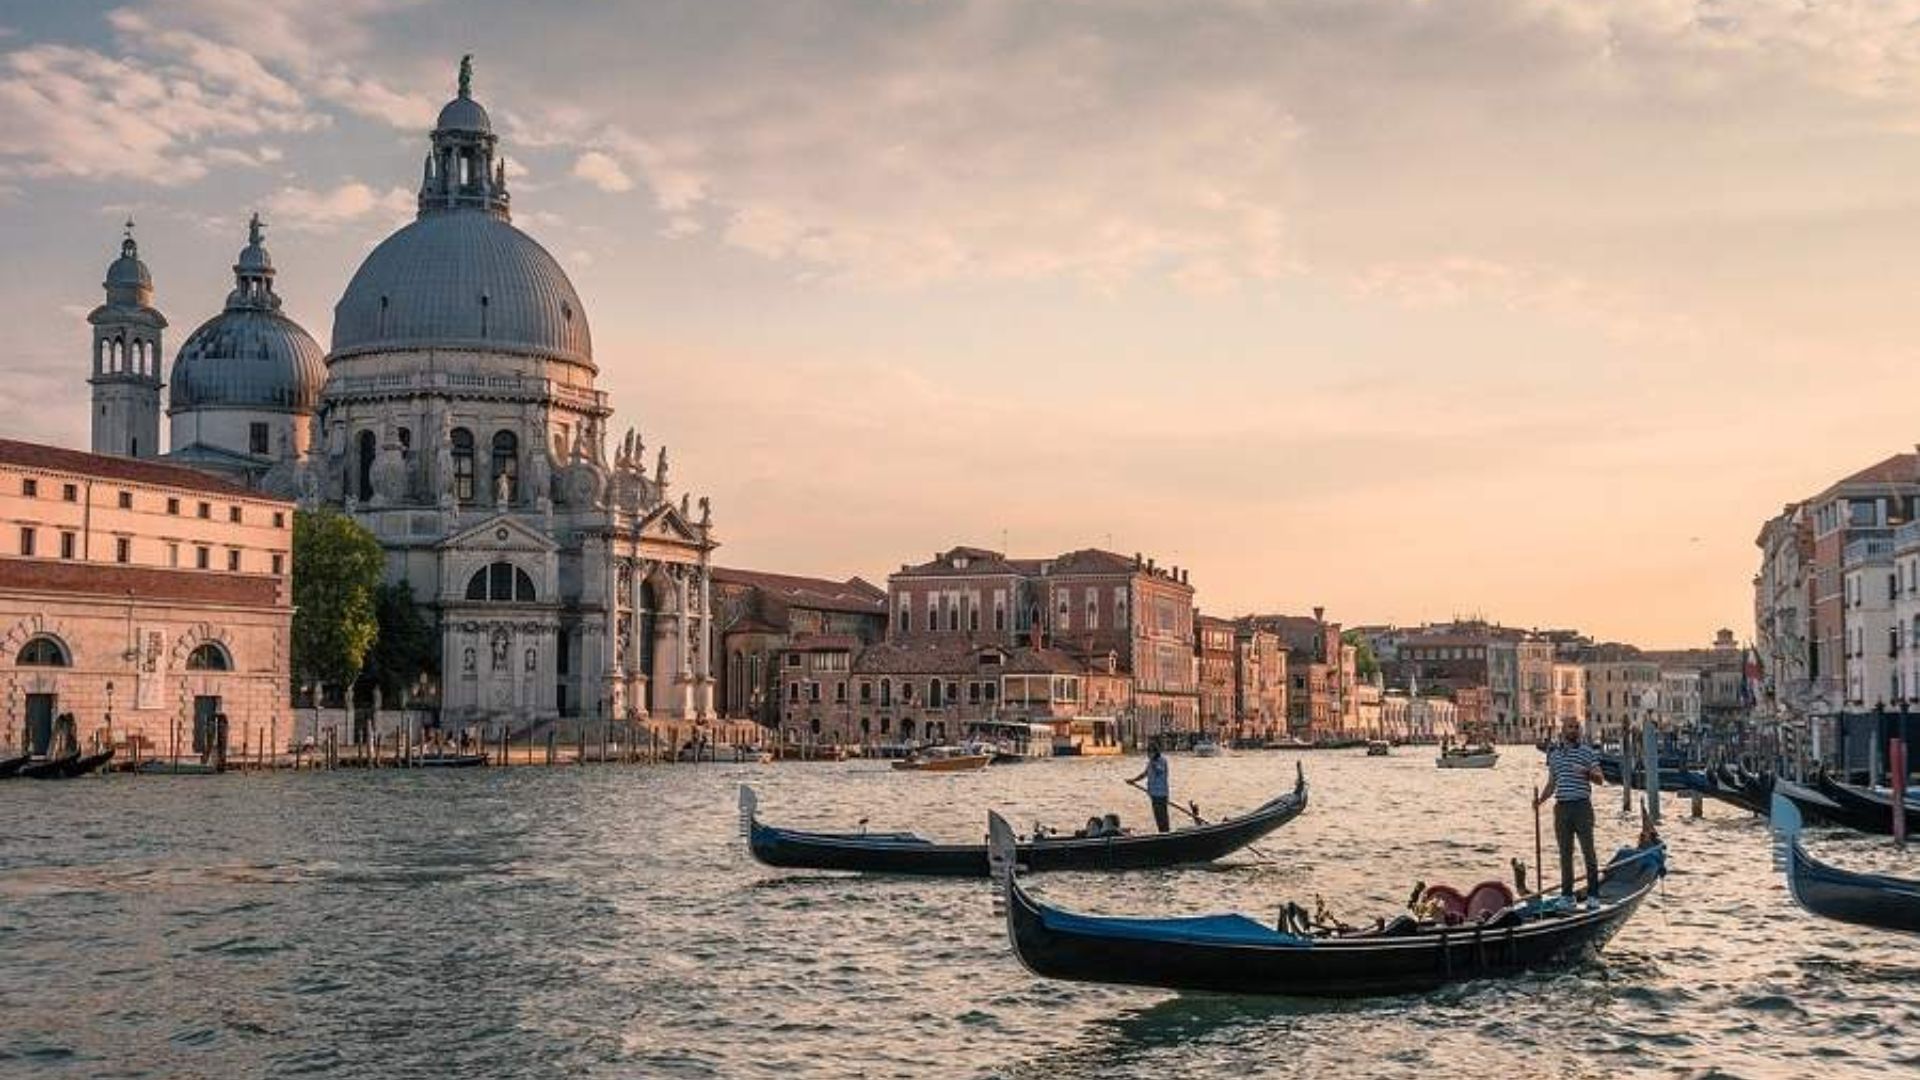 Wonders of Venice, Florence, Cinque Terre and Rome